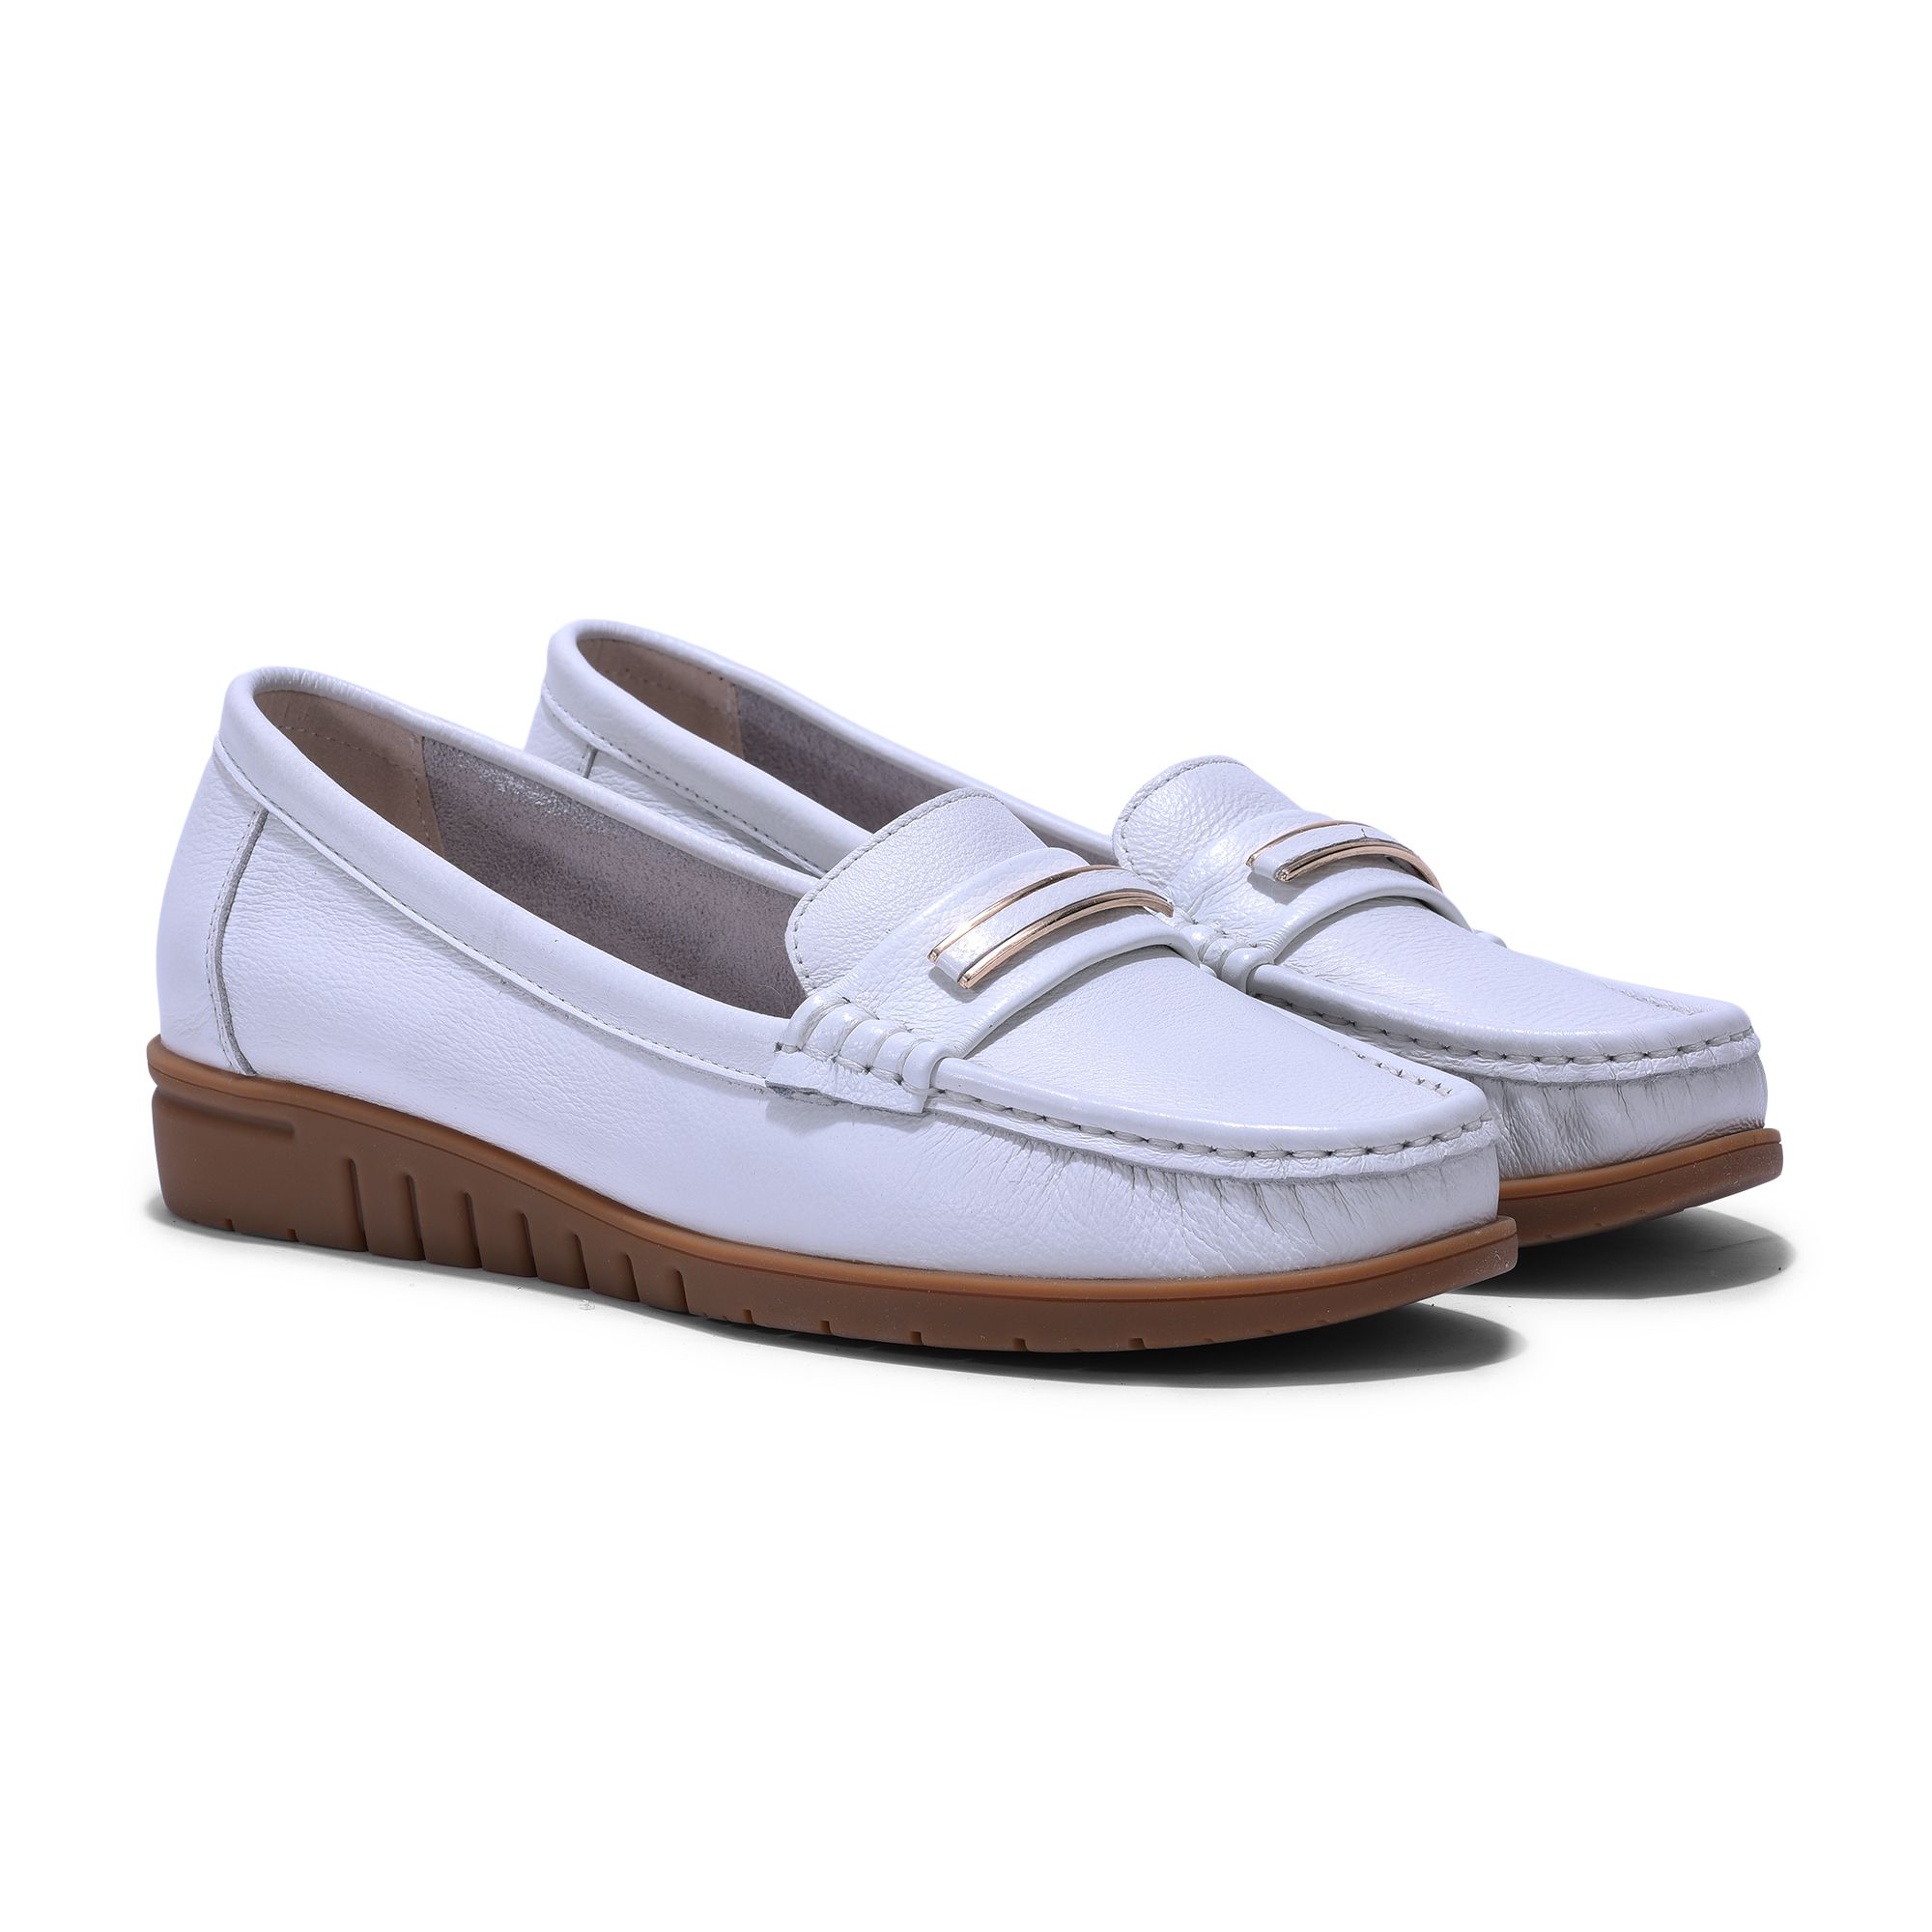 White loafers for women